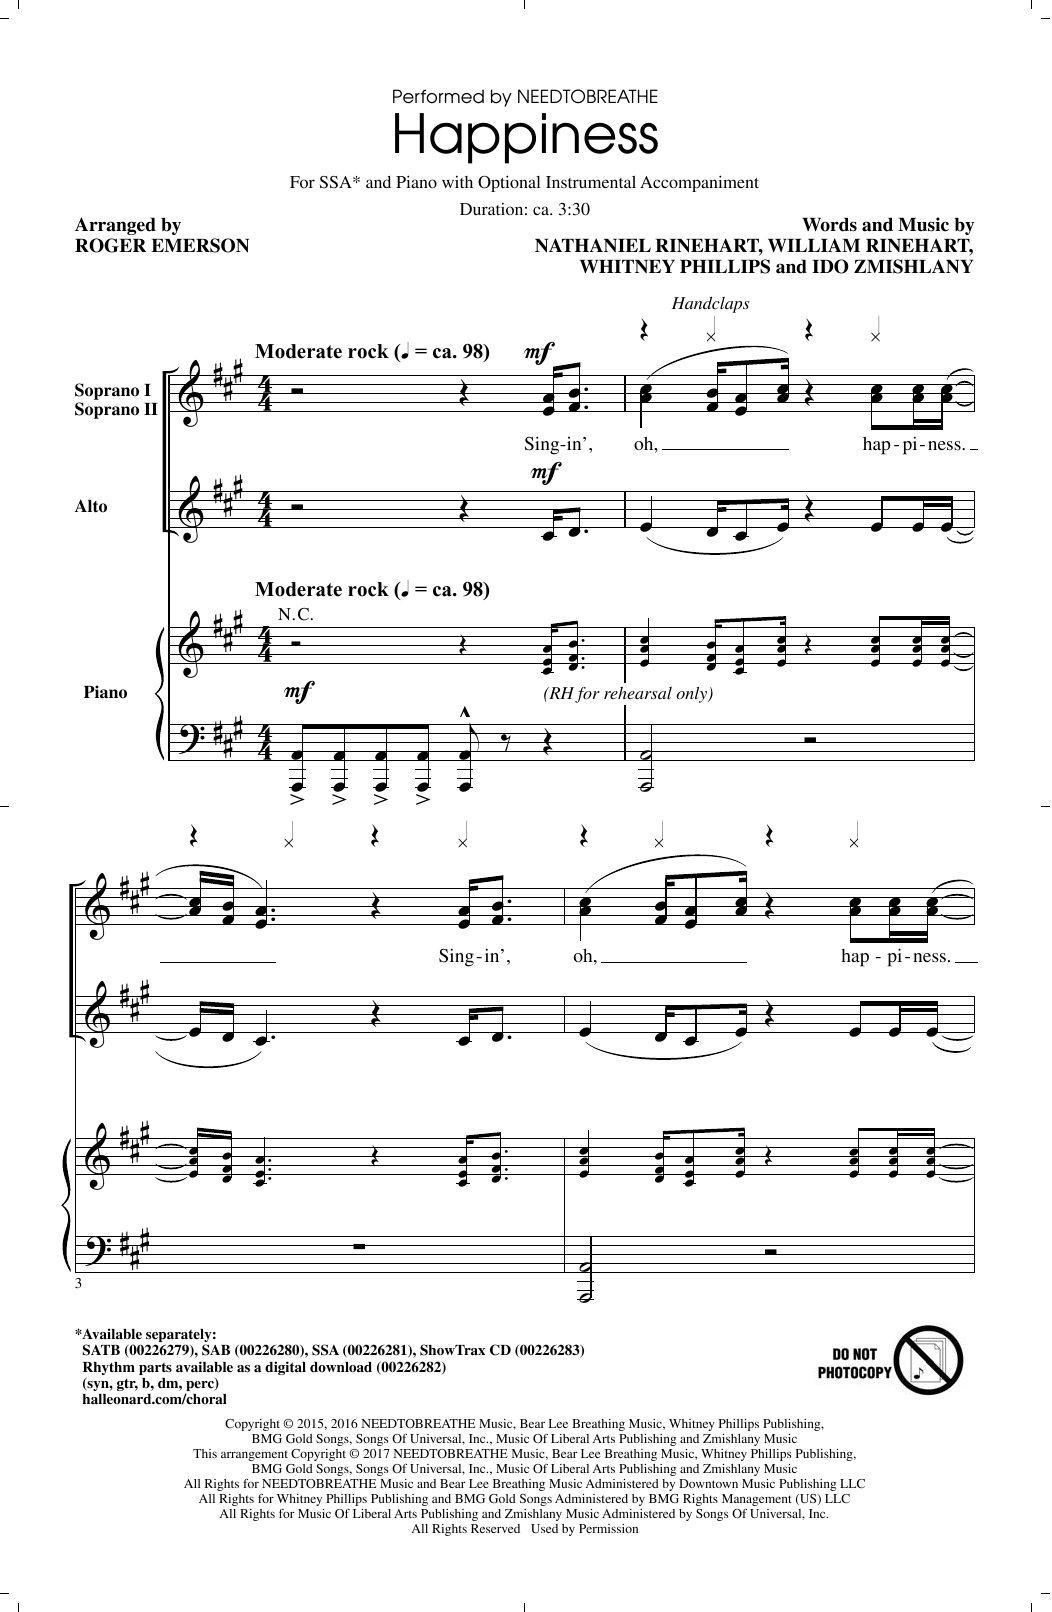 Download Roger Emerson Happiness Sheet Music